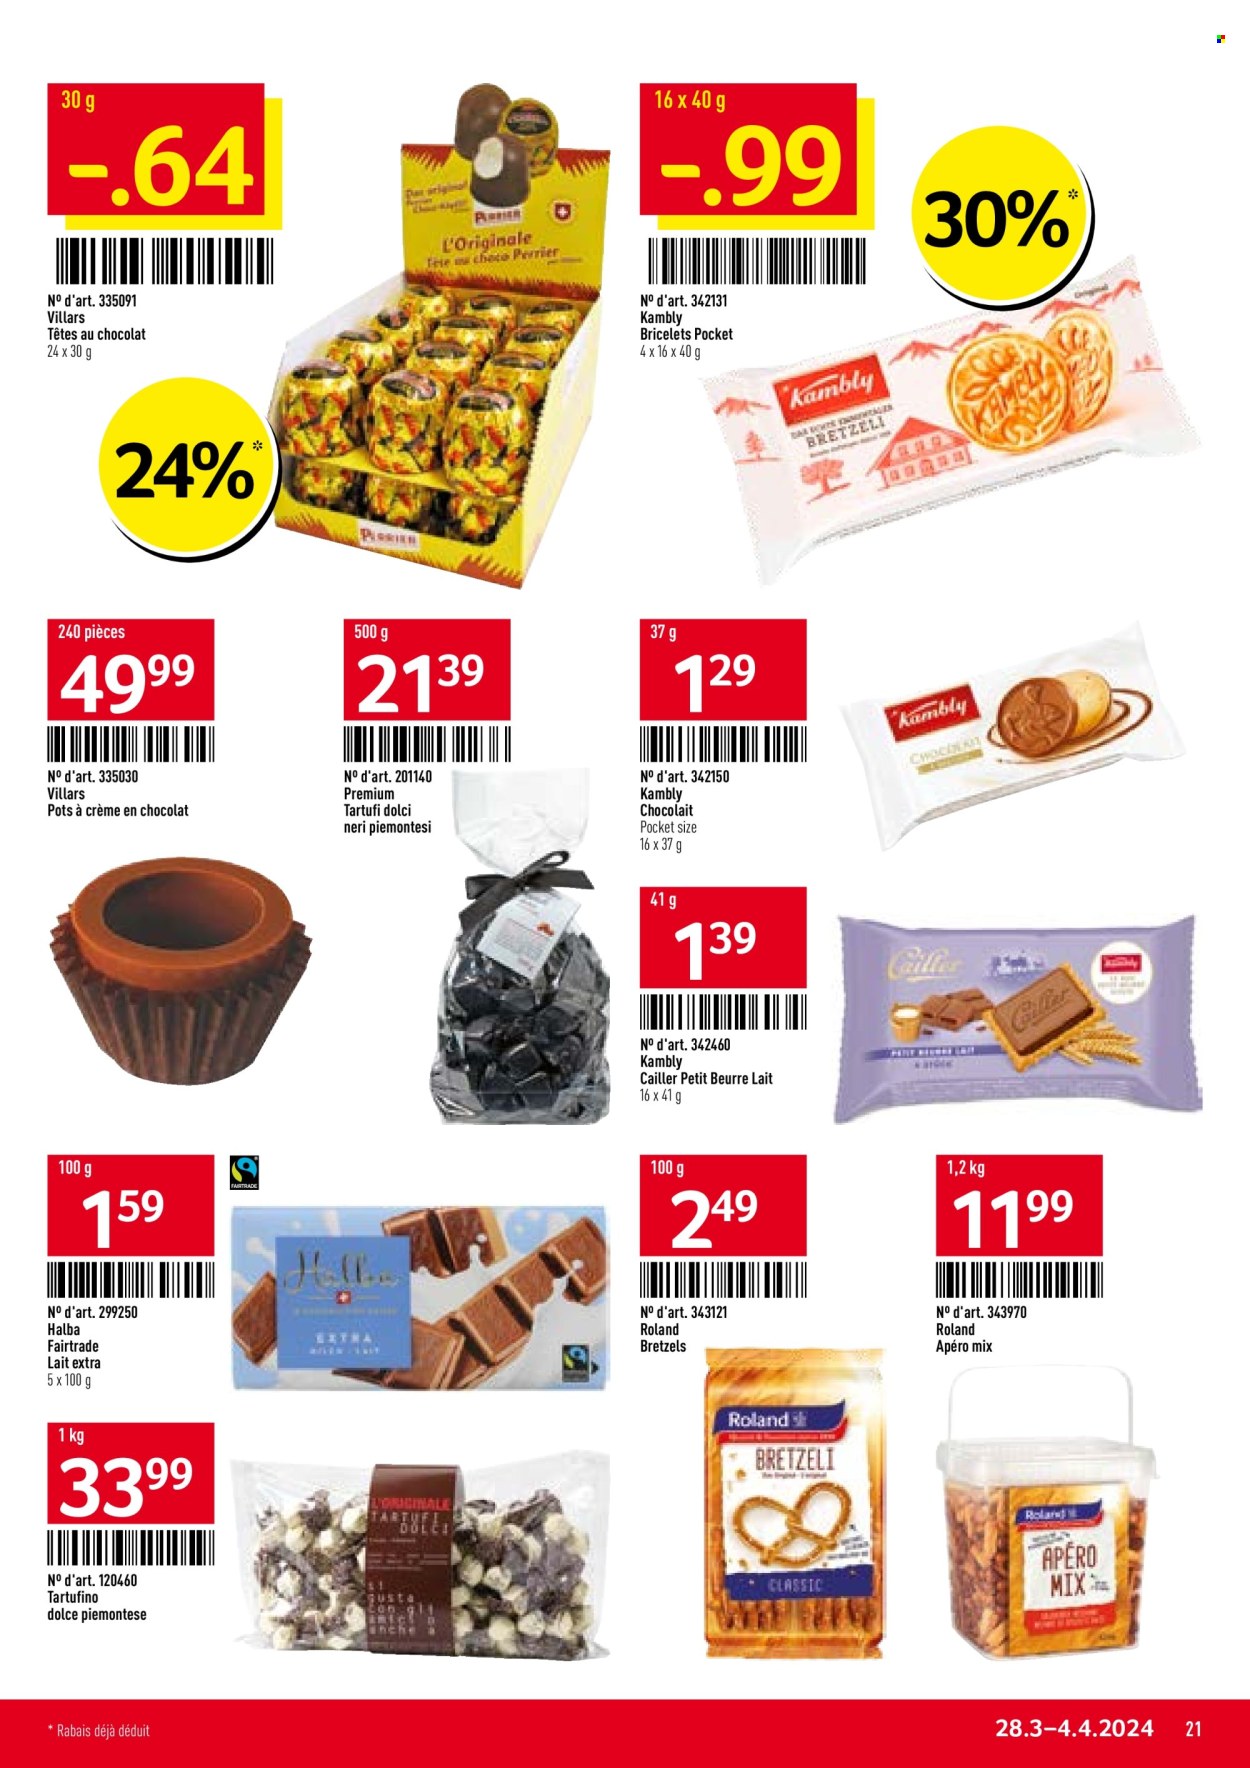 Catalogue TransGourmet - 28.3.2024 - 4.4.2024. Page 21.